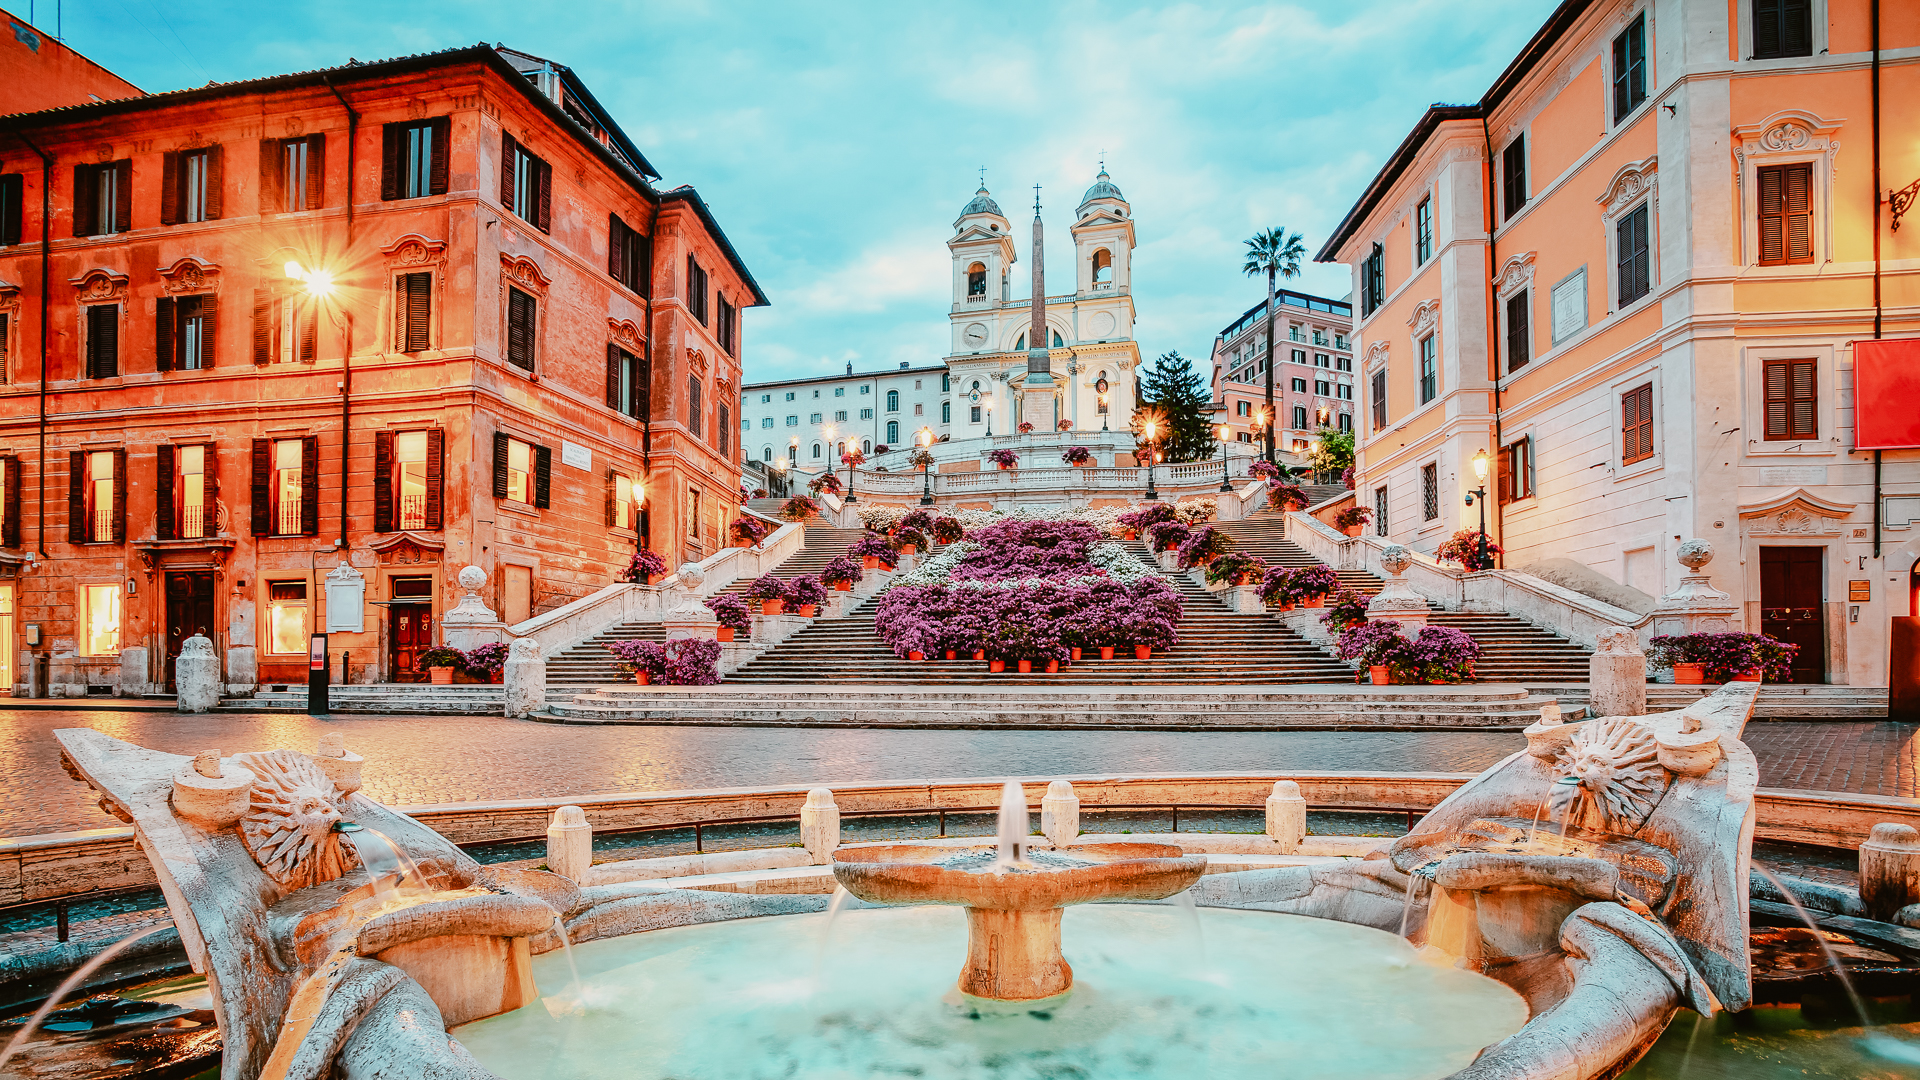 This image shows Piazza di Spagna in Rome, Italy early in the morning. 